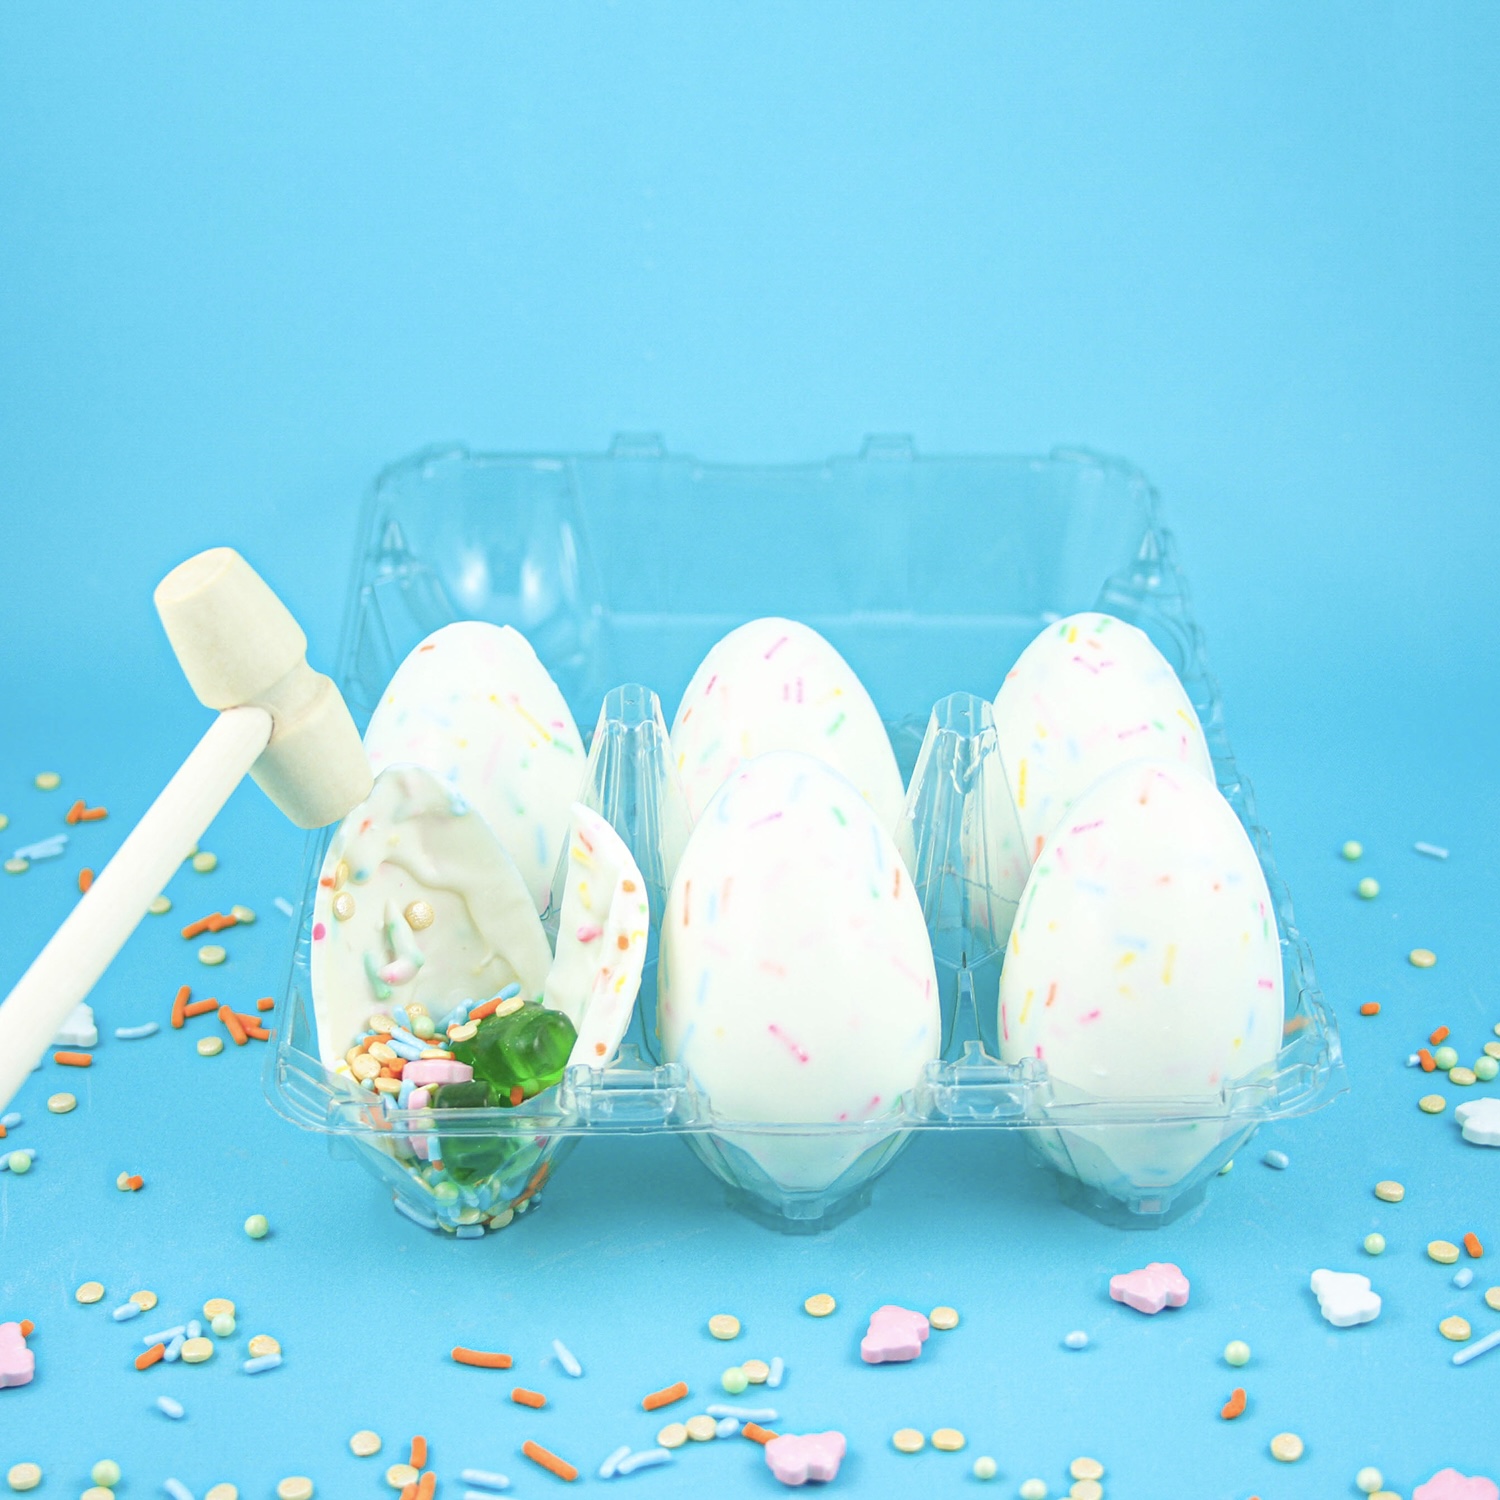 White chocolate breakable eggs in clear egg carton and a broken egg with gummy bears and sprinkles